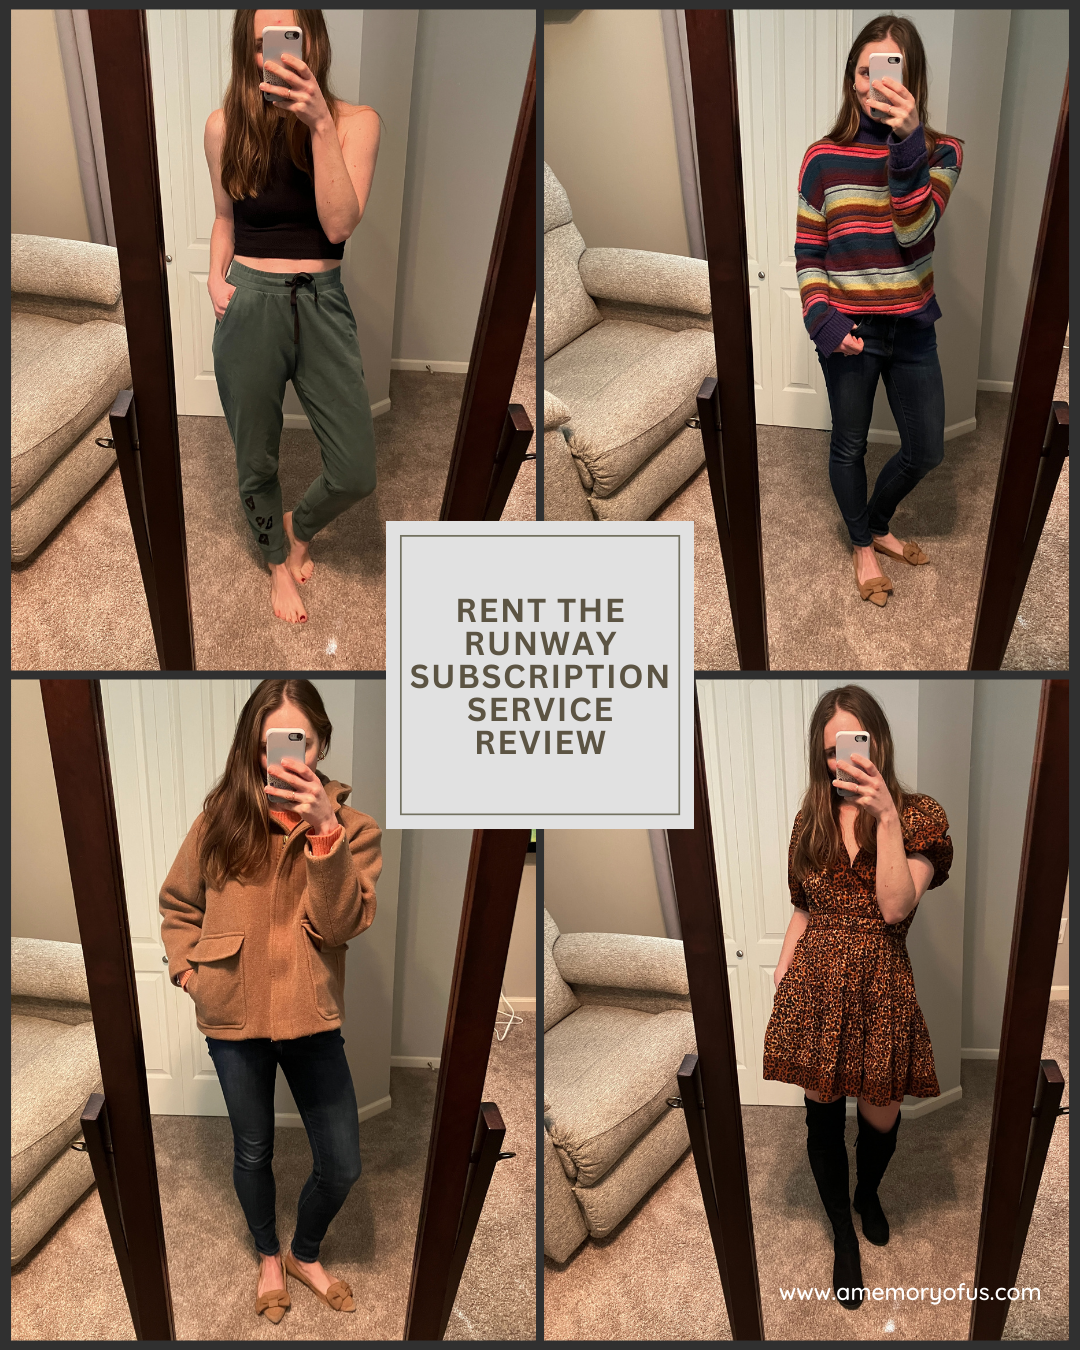 Rent the Runway Subscription Service Review | A Review of Rent the Runway | Rent the Runway Subscription Plan | RTR Review | A Memory of Us | Using Rent the Runway for a Vacation